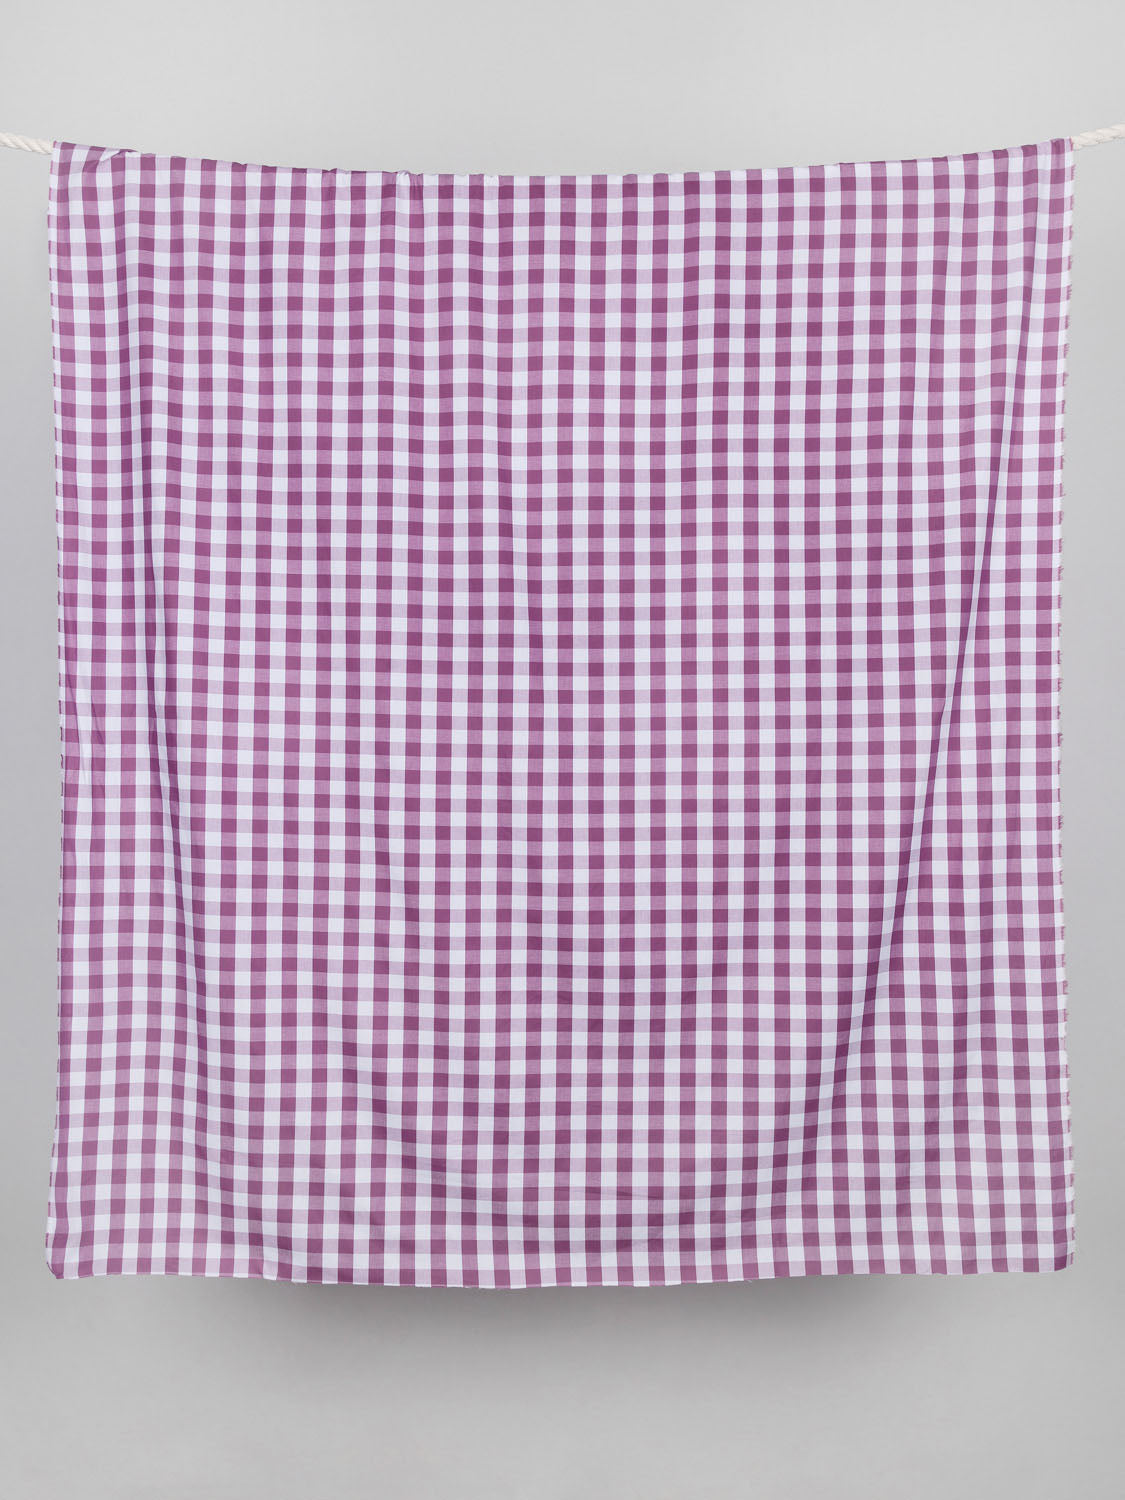 Large Scale Yarn-Dyed Gingham Cotton - Mulberry + White | Core Fabrics